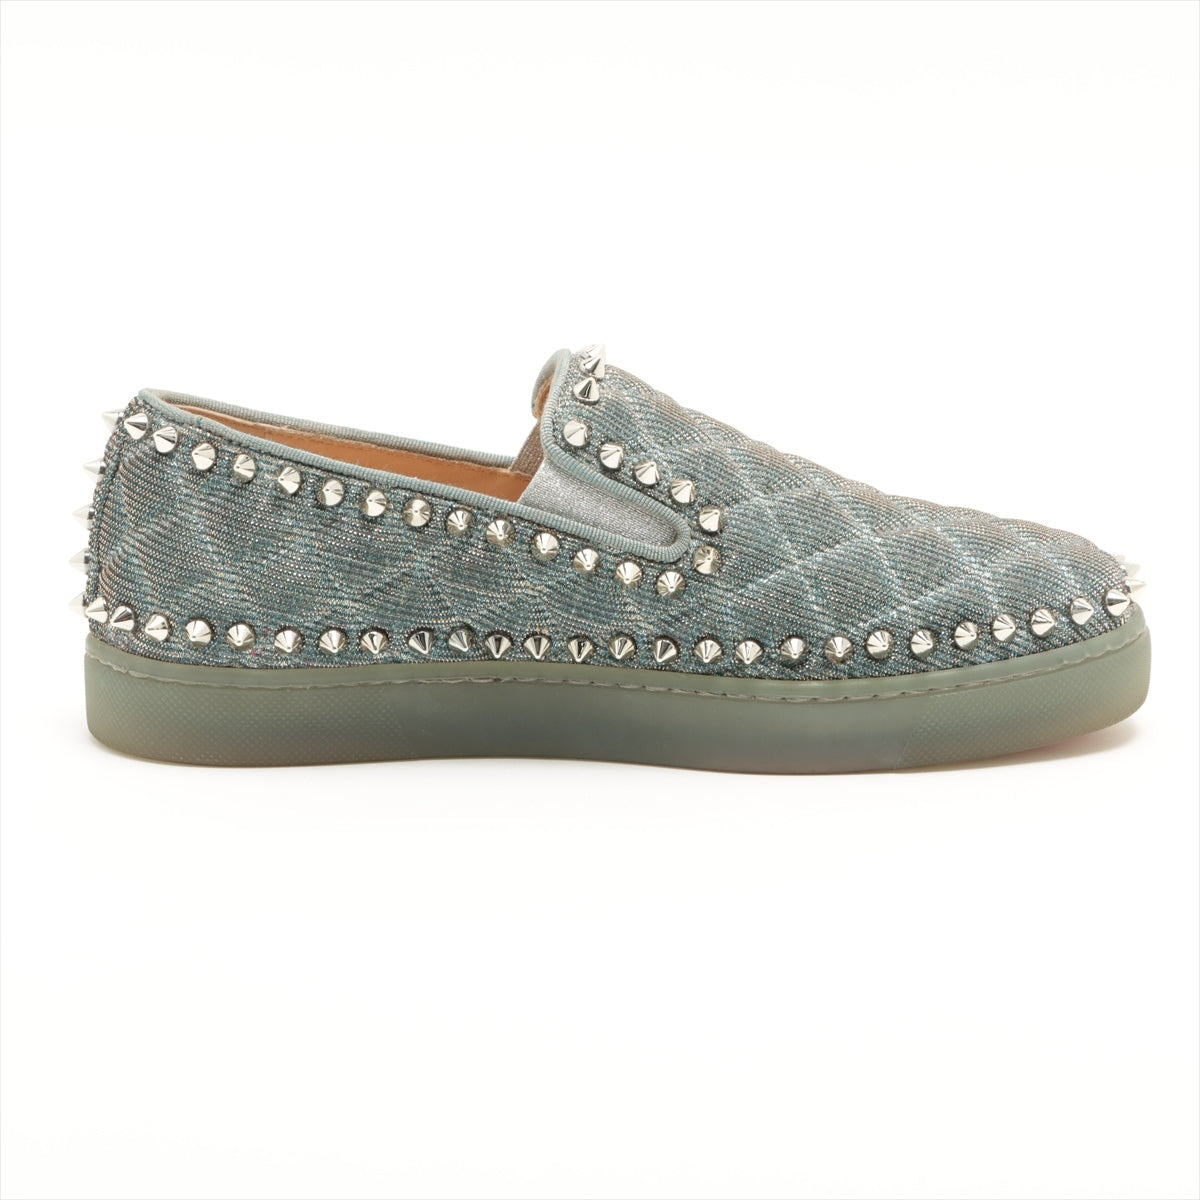 Christian Louboutin pick boat Fabric Slip-on 35 1/2 Ladies' Blue There is a stud thread